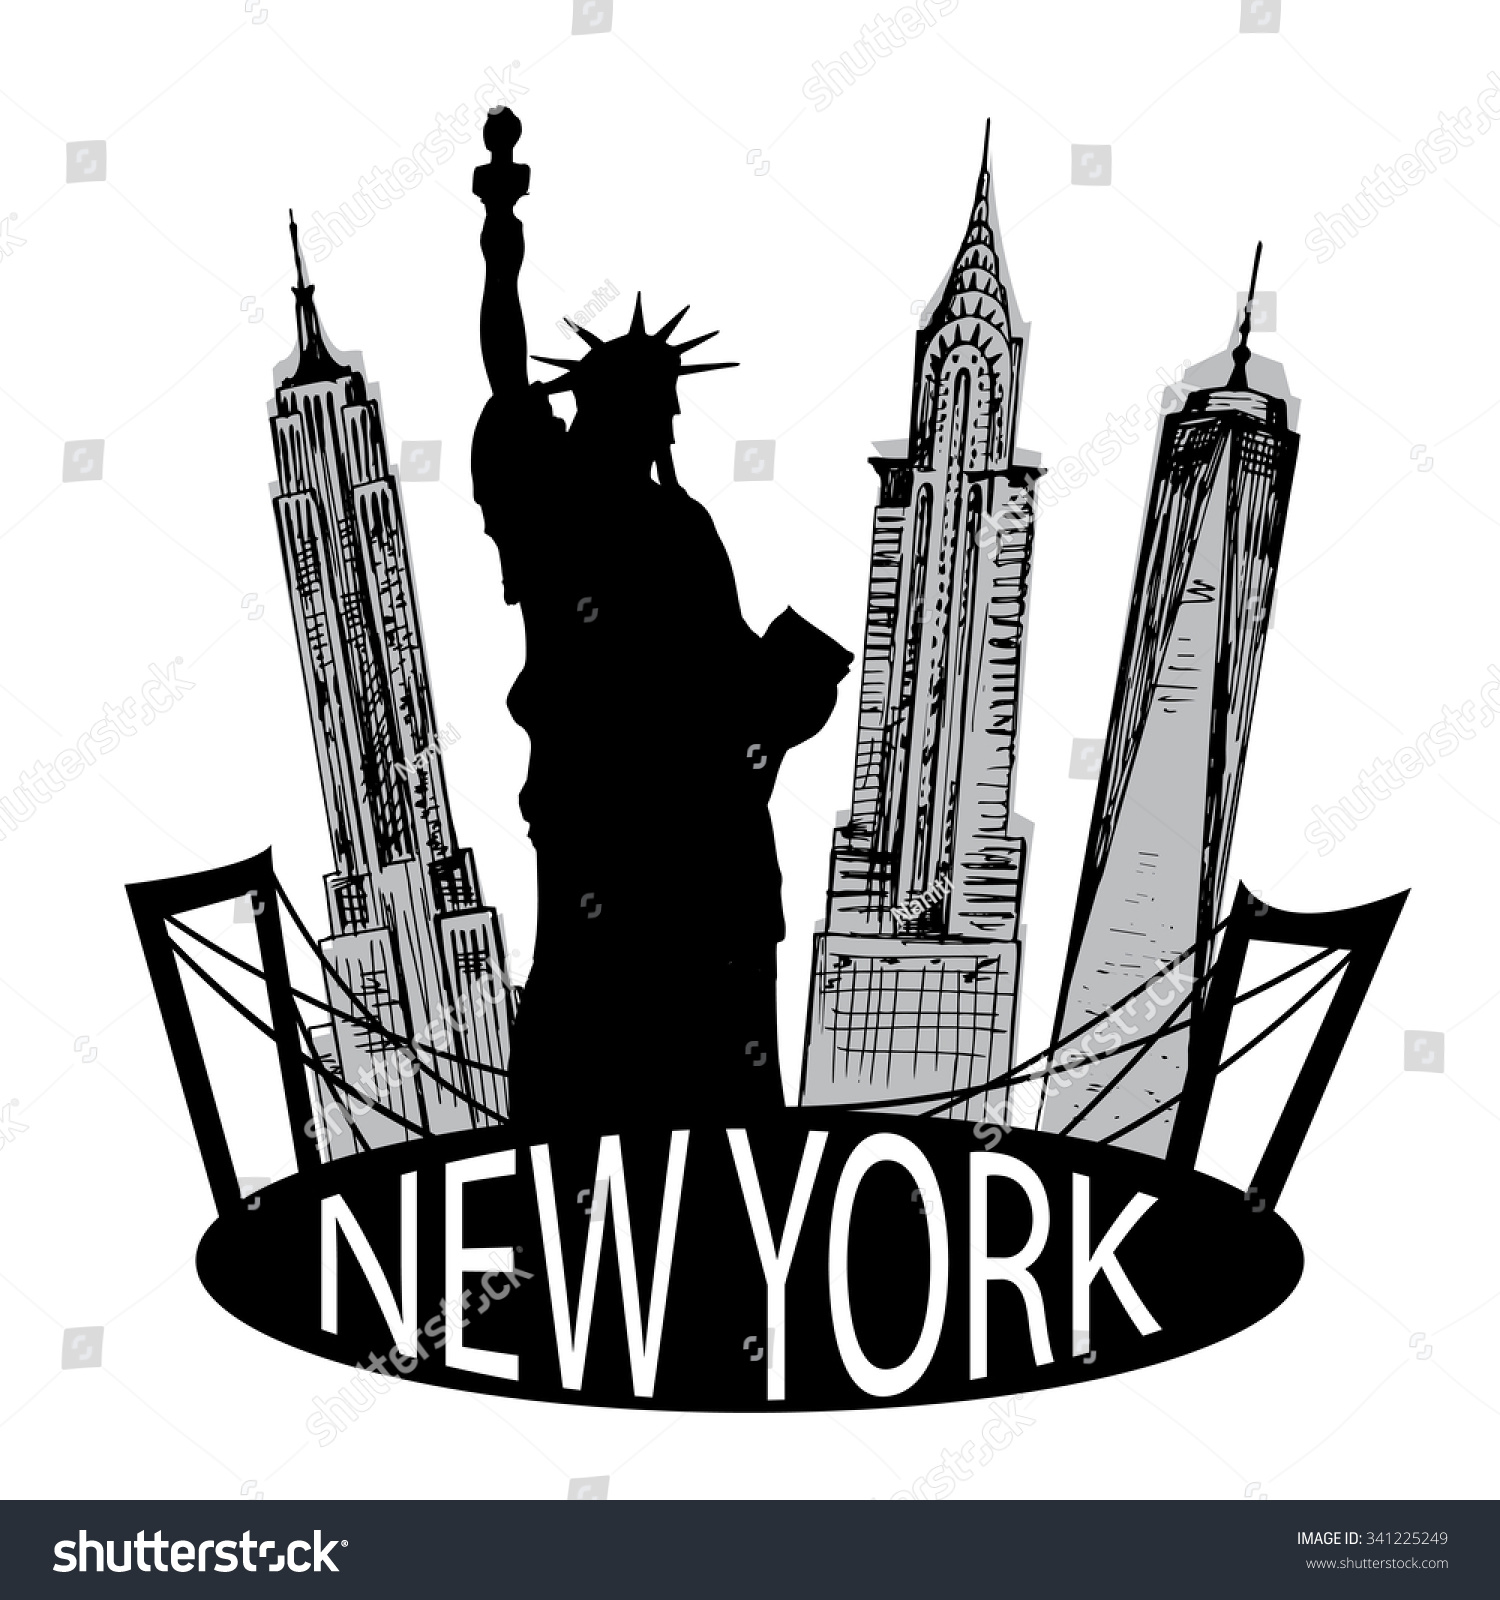 SVG of New York famous building and Liberty statue svg